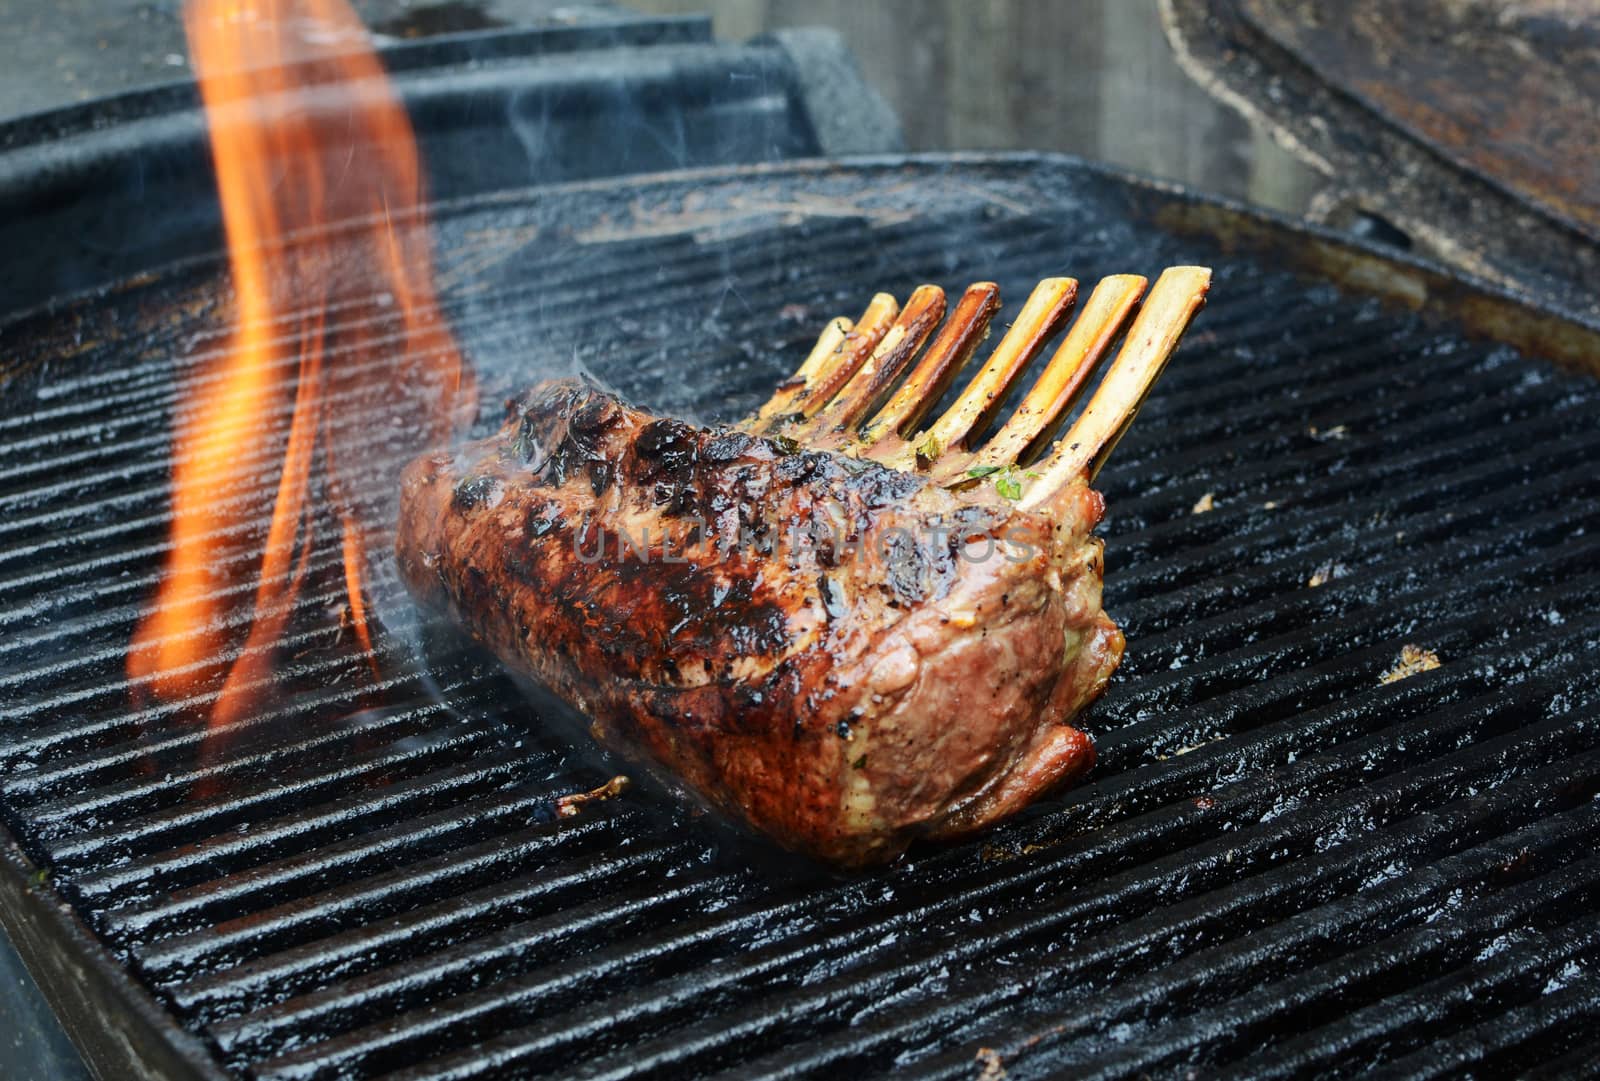 Flame rises from a grill around barbecued meat - a rack of lamb with 7 ribs